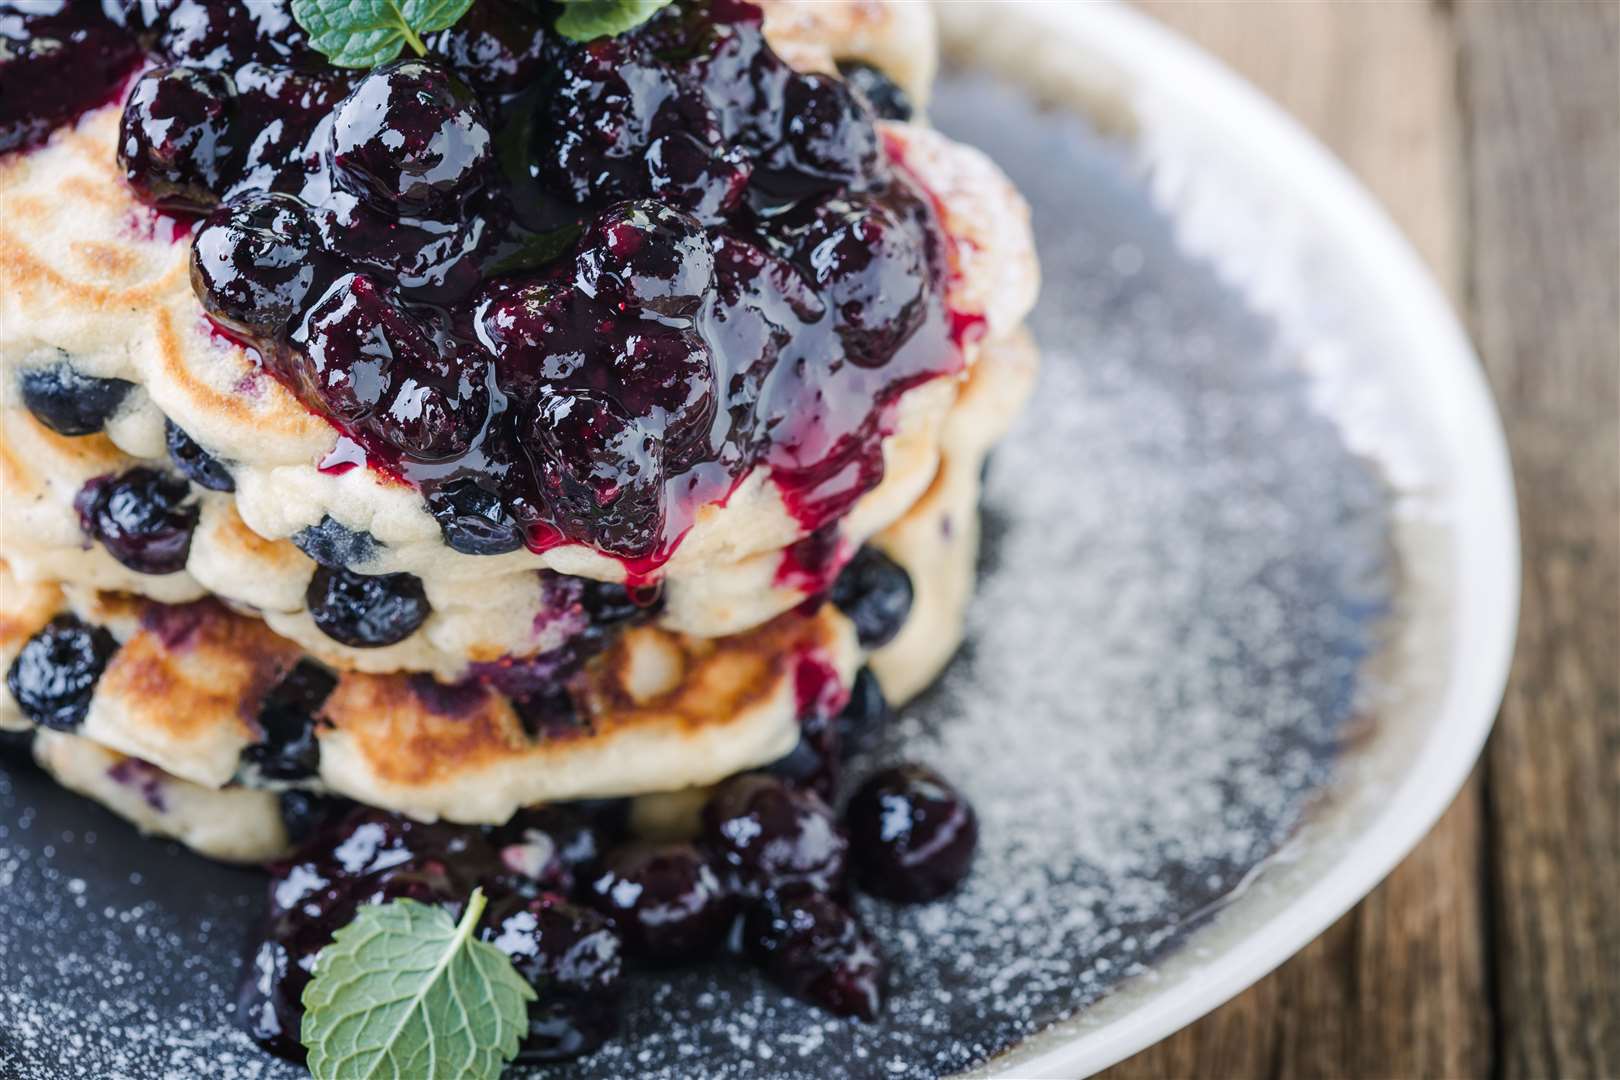 Bursting with blueberries, these pancakes make a filling breakfast.